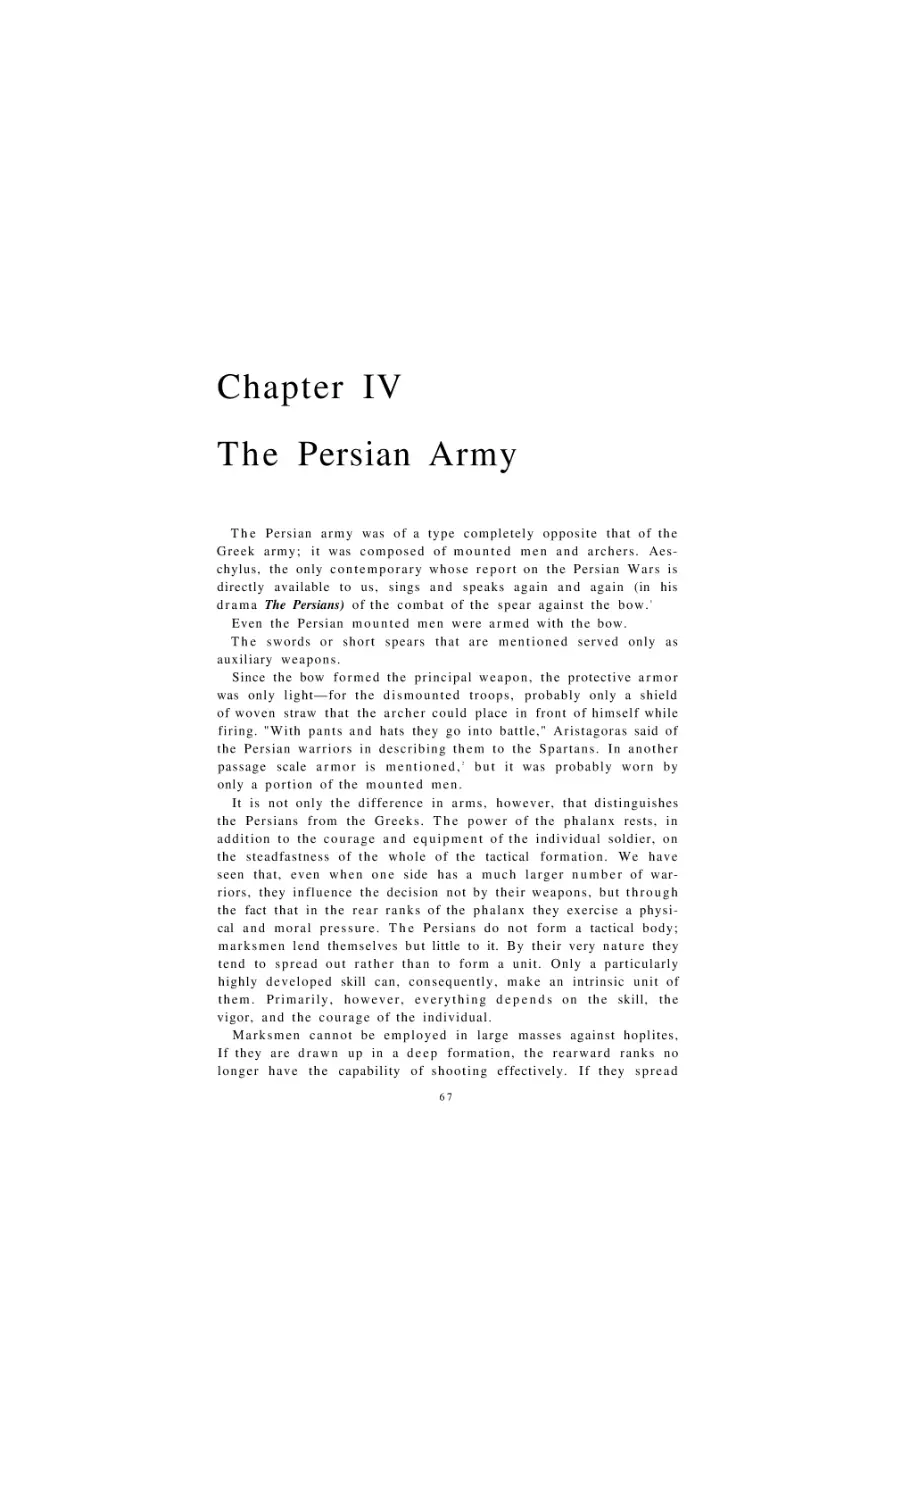 The Persian Army